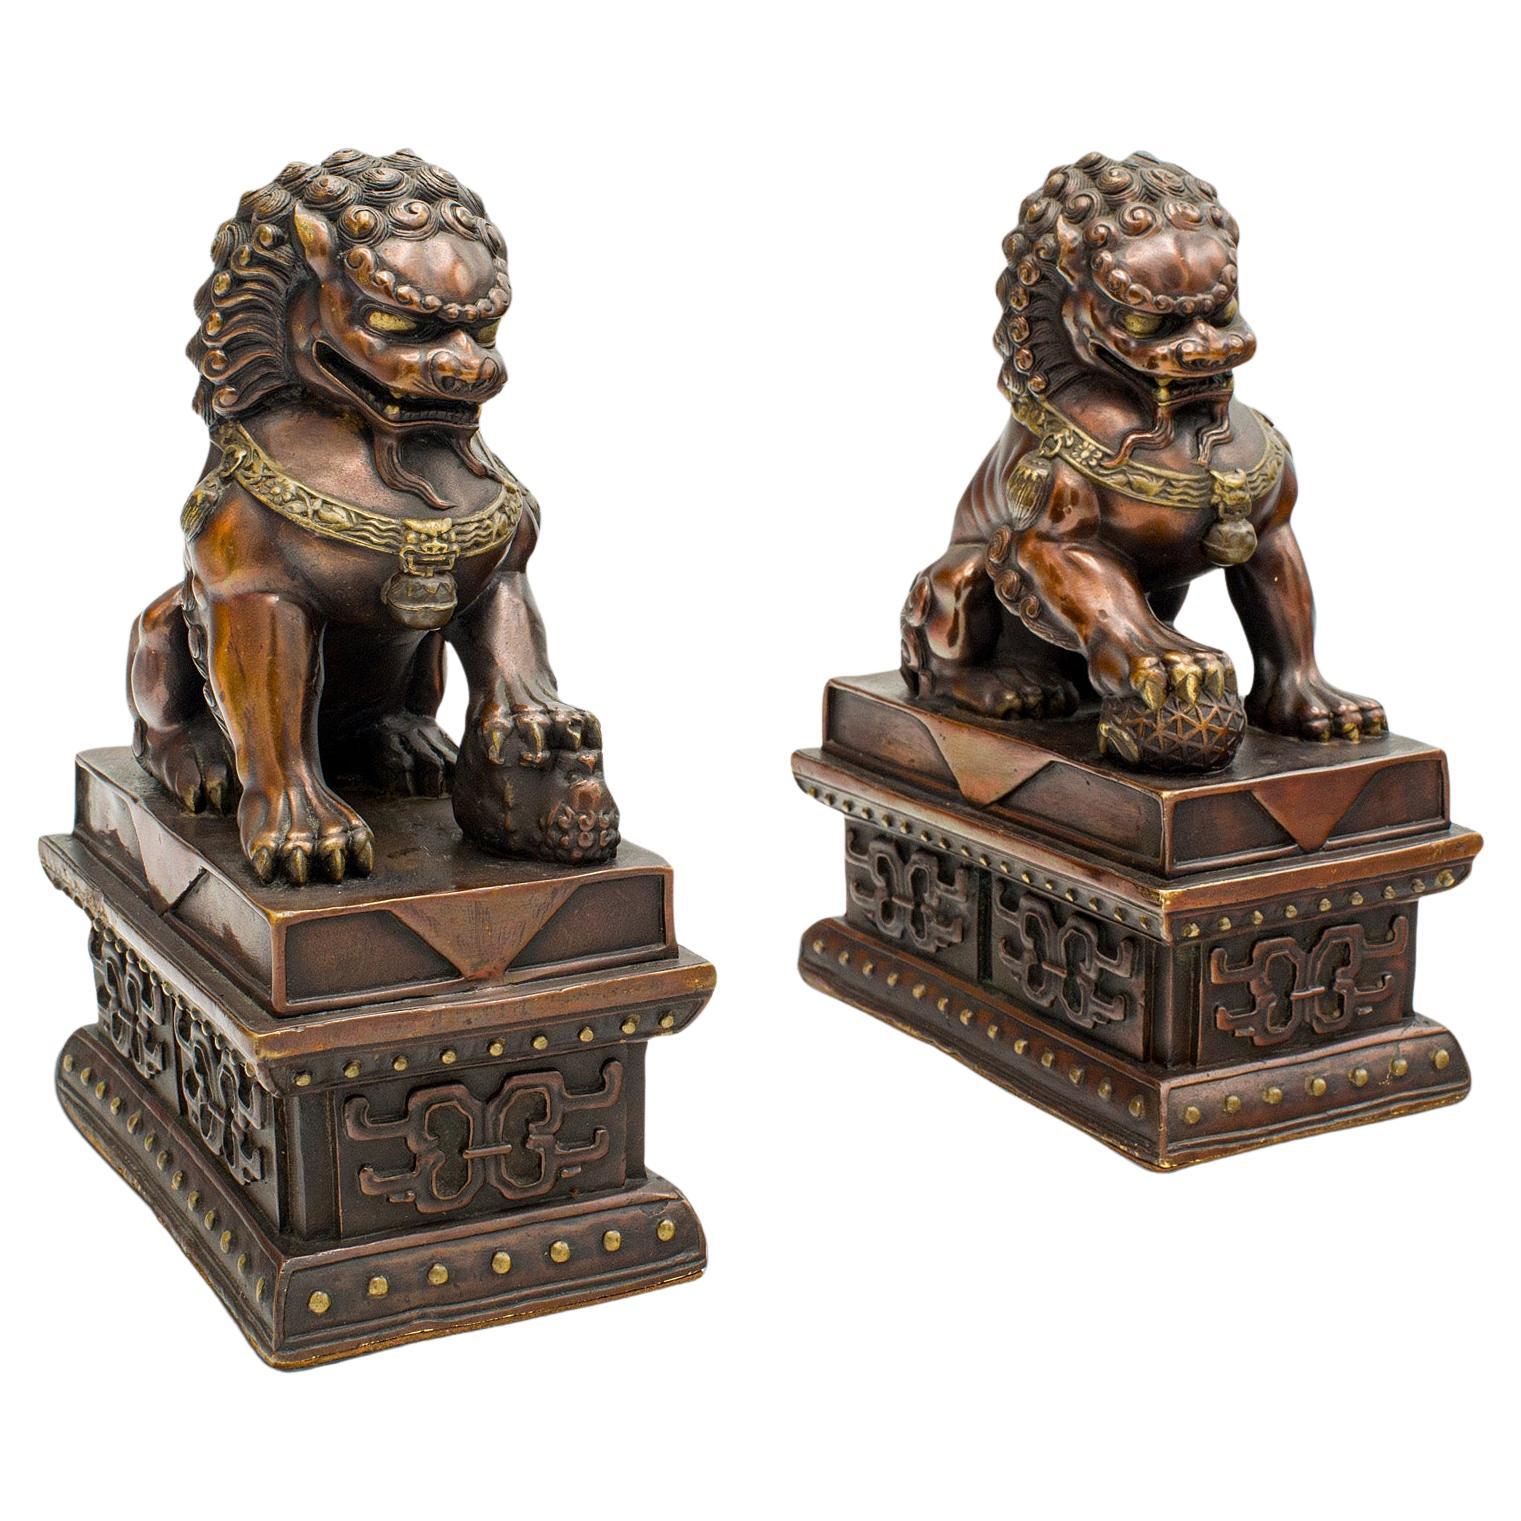 Pair Of Vintage Imperial Lion Statues, Chinese, Bronze, Bookends, Art Deco, 1940